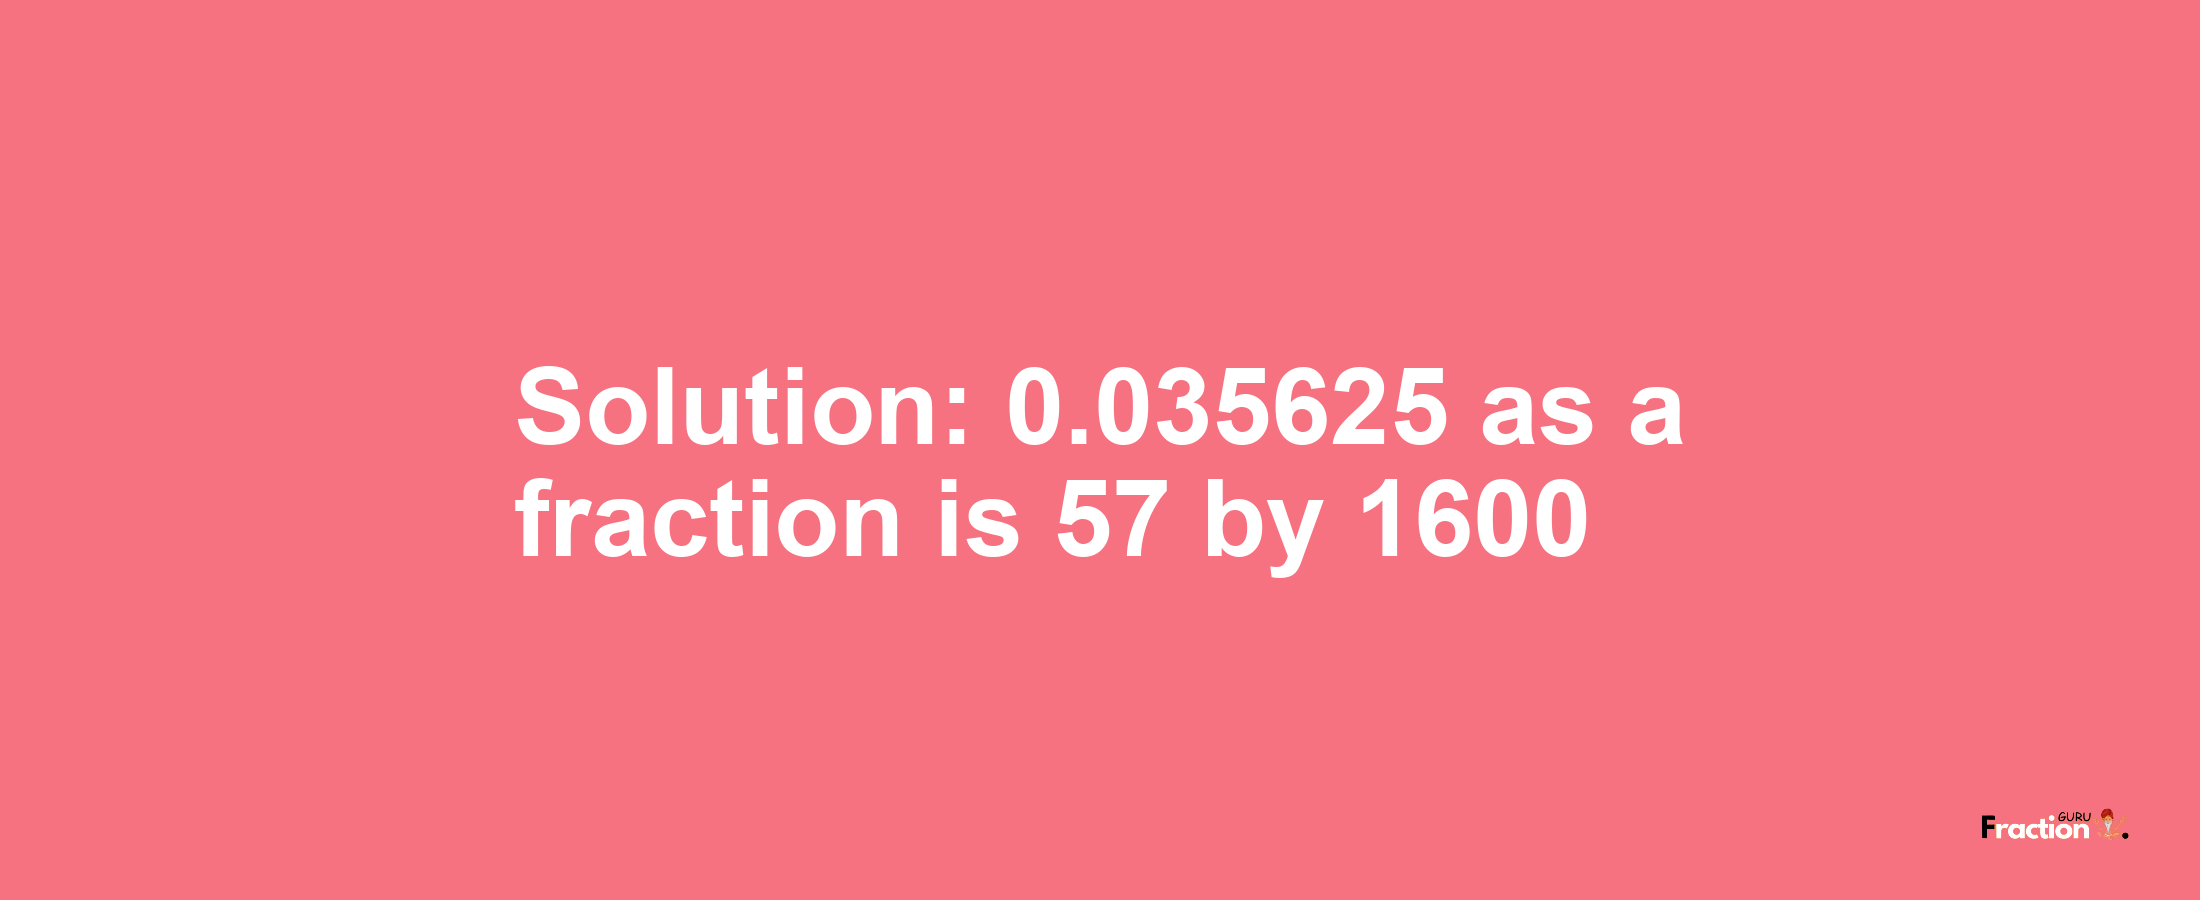 Solution:0.035625 as a fraction is 57/1600